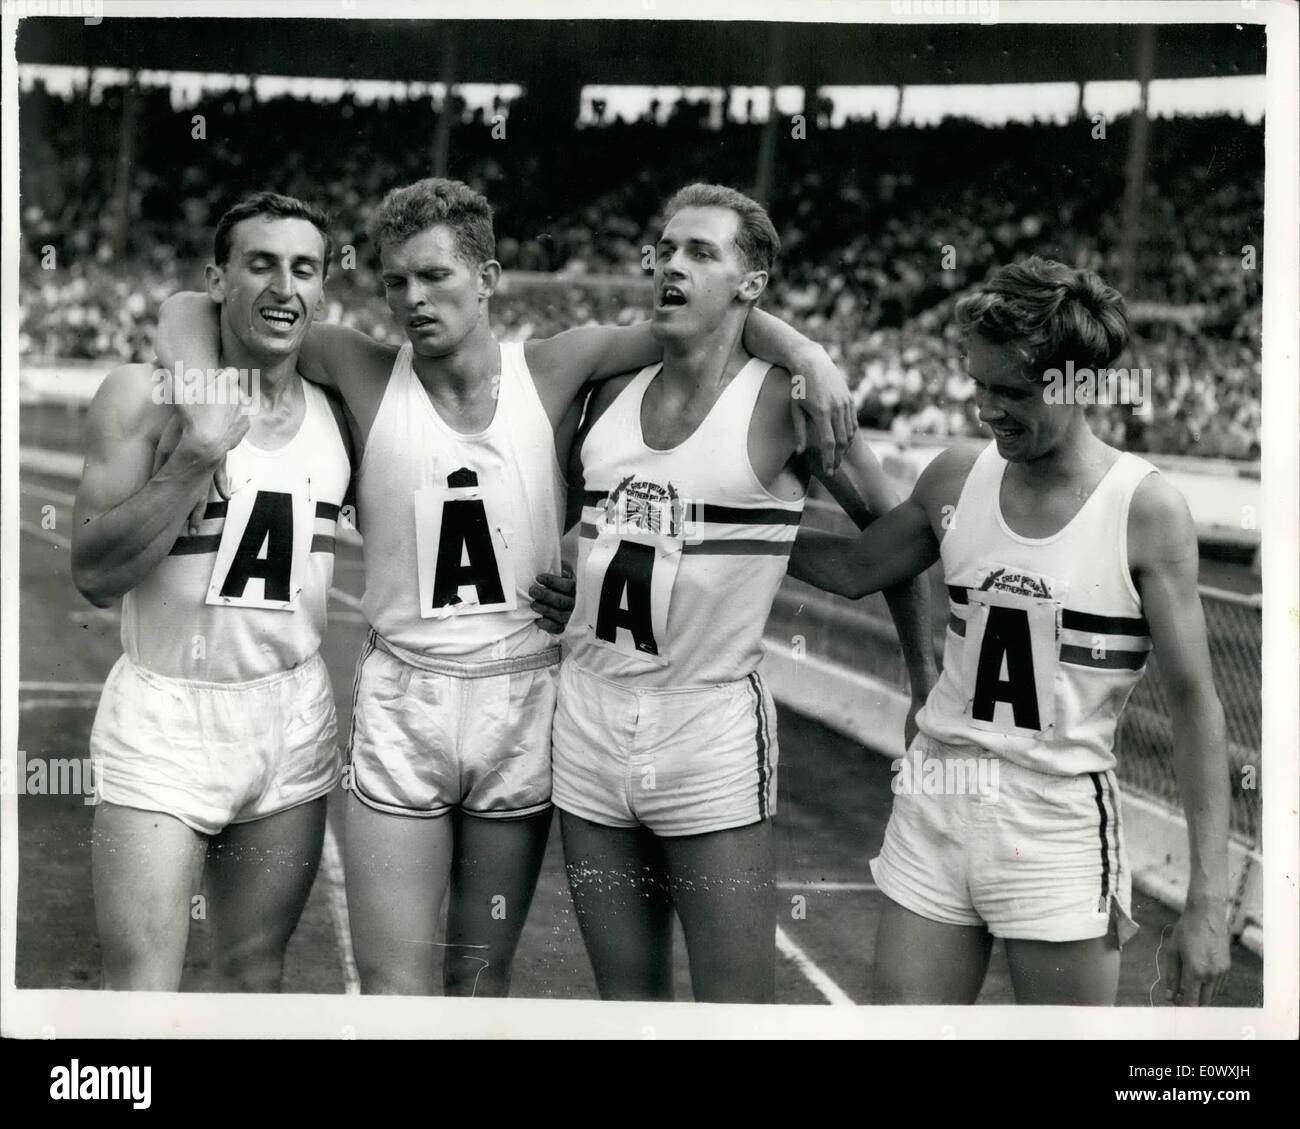 Aug. 08, 1964 - International Athletics at White City. British relay team sets up record. Ready for Tokyo?. Photo shows the British Relay team - after winning the 4 x 400 metres Relay event at White City this afternoon in the new British Empire and Commonwealth Record time of 3m. 5 sec. They are L-R: J.H. Cooper; R.I. Brightwell; A. Metacalfe and T.J. Graham. Tokyo - here we come? Stock Photo